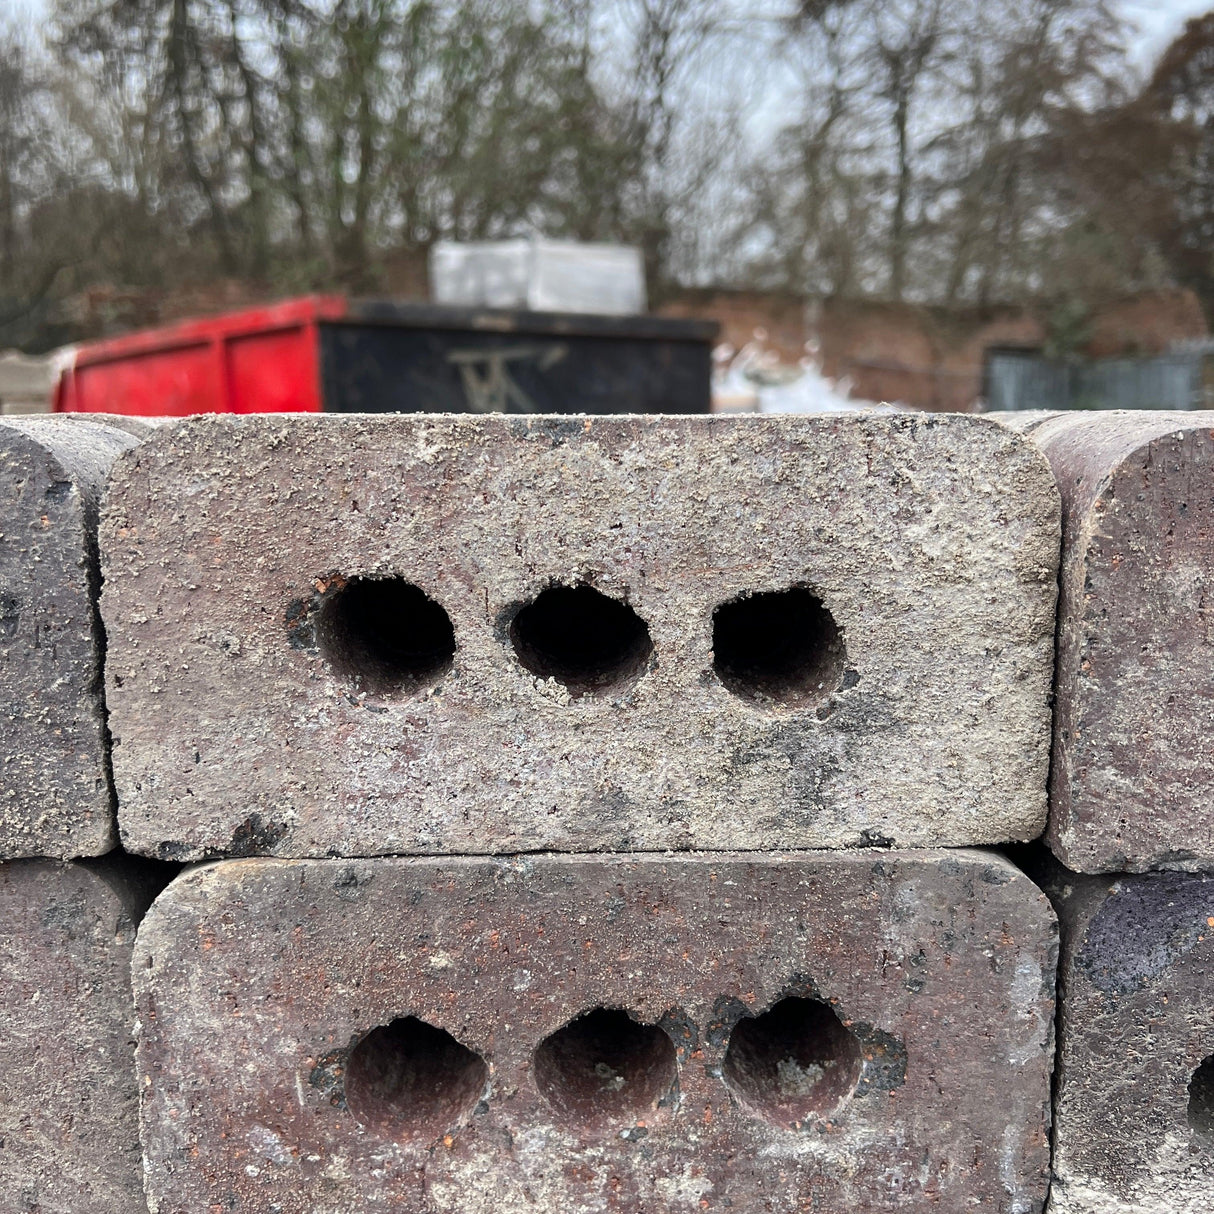 Staffordshire Blue Double Cant Coping Brick - Reclaimed Brick Company